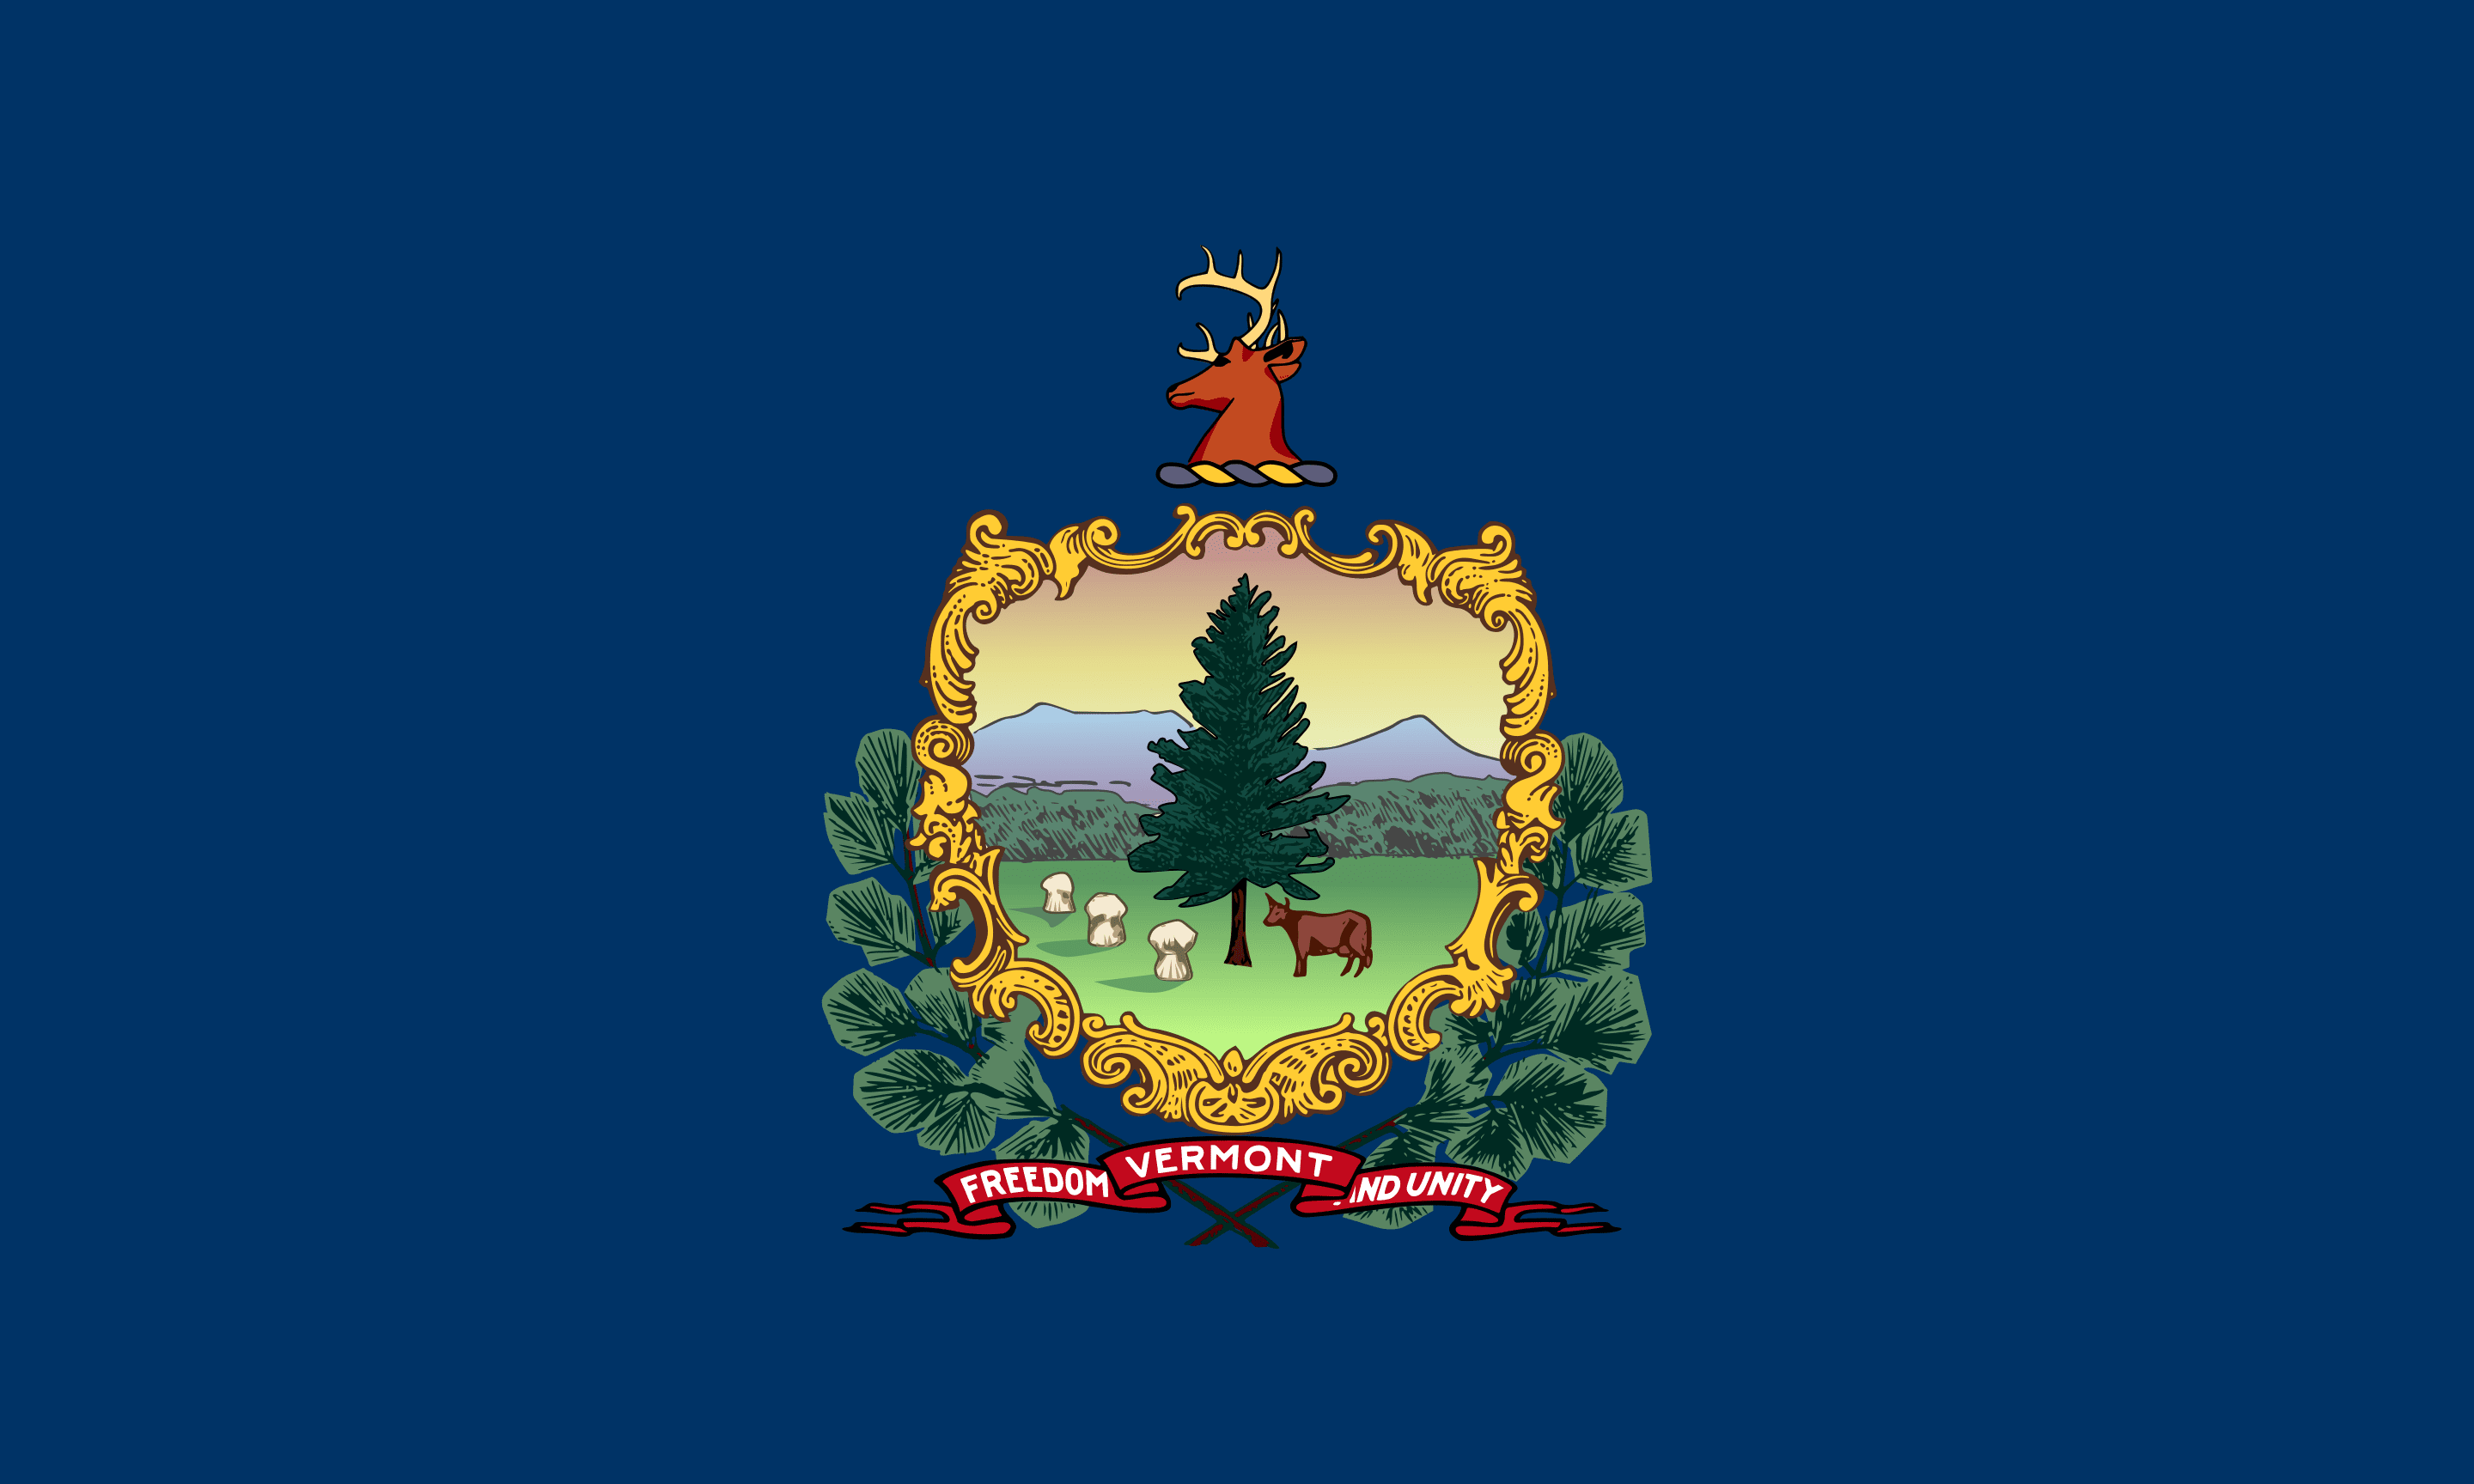 Drone Laws in Vermont